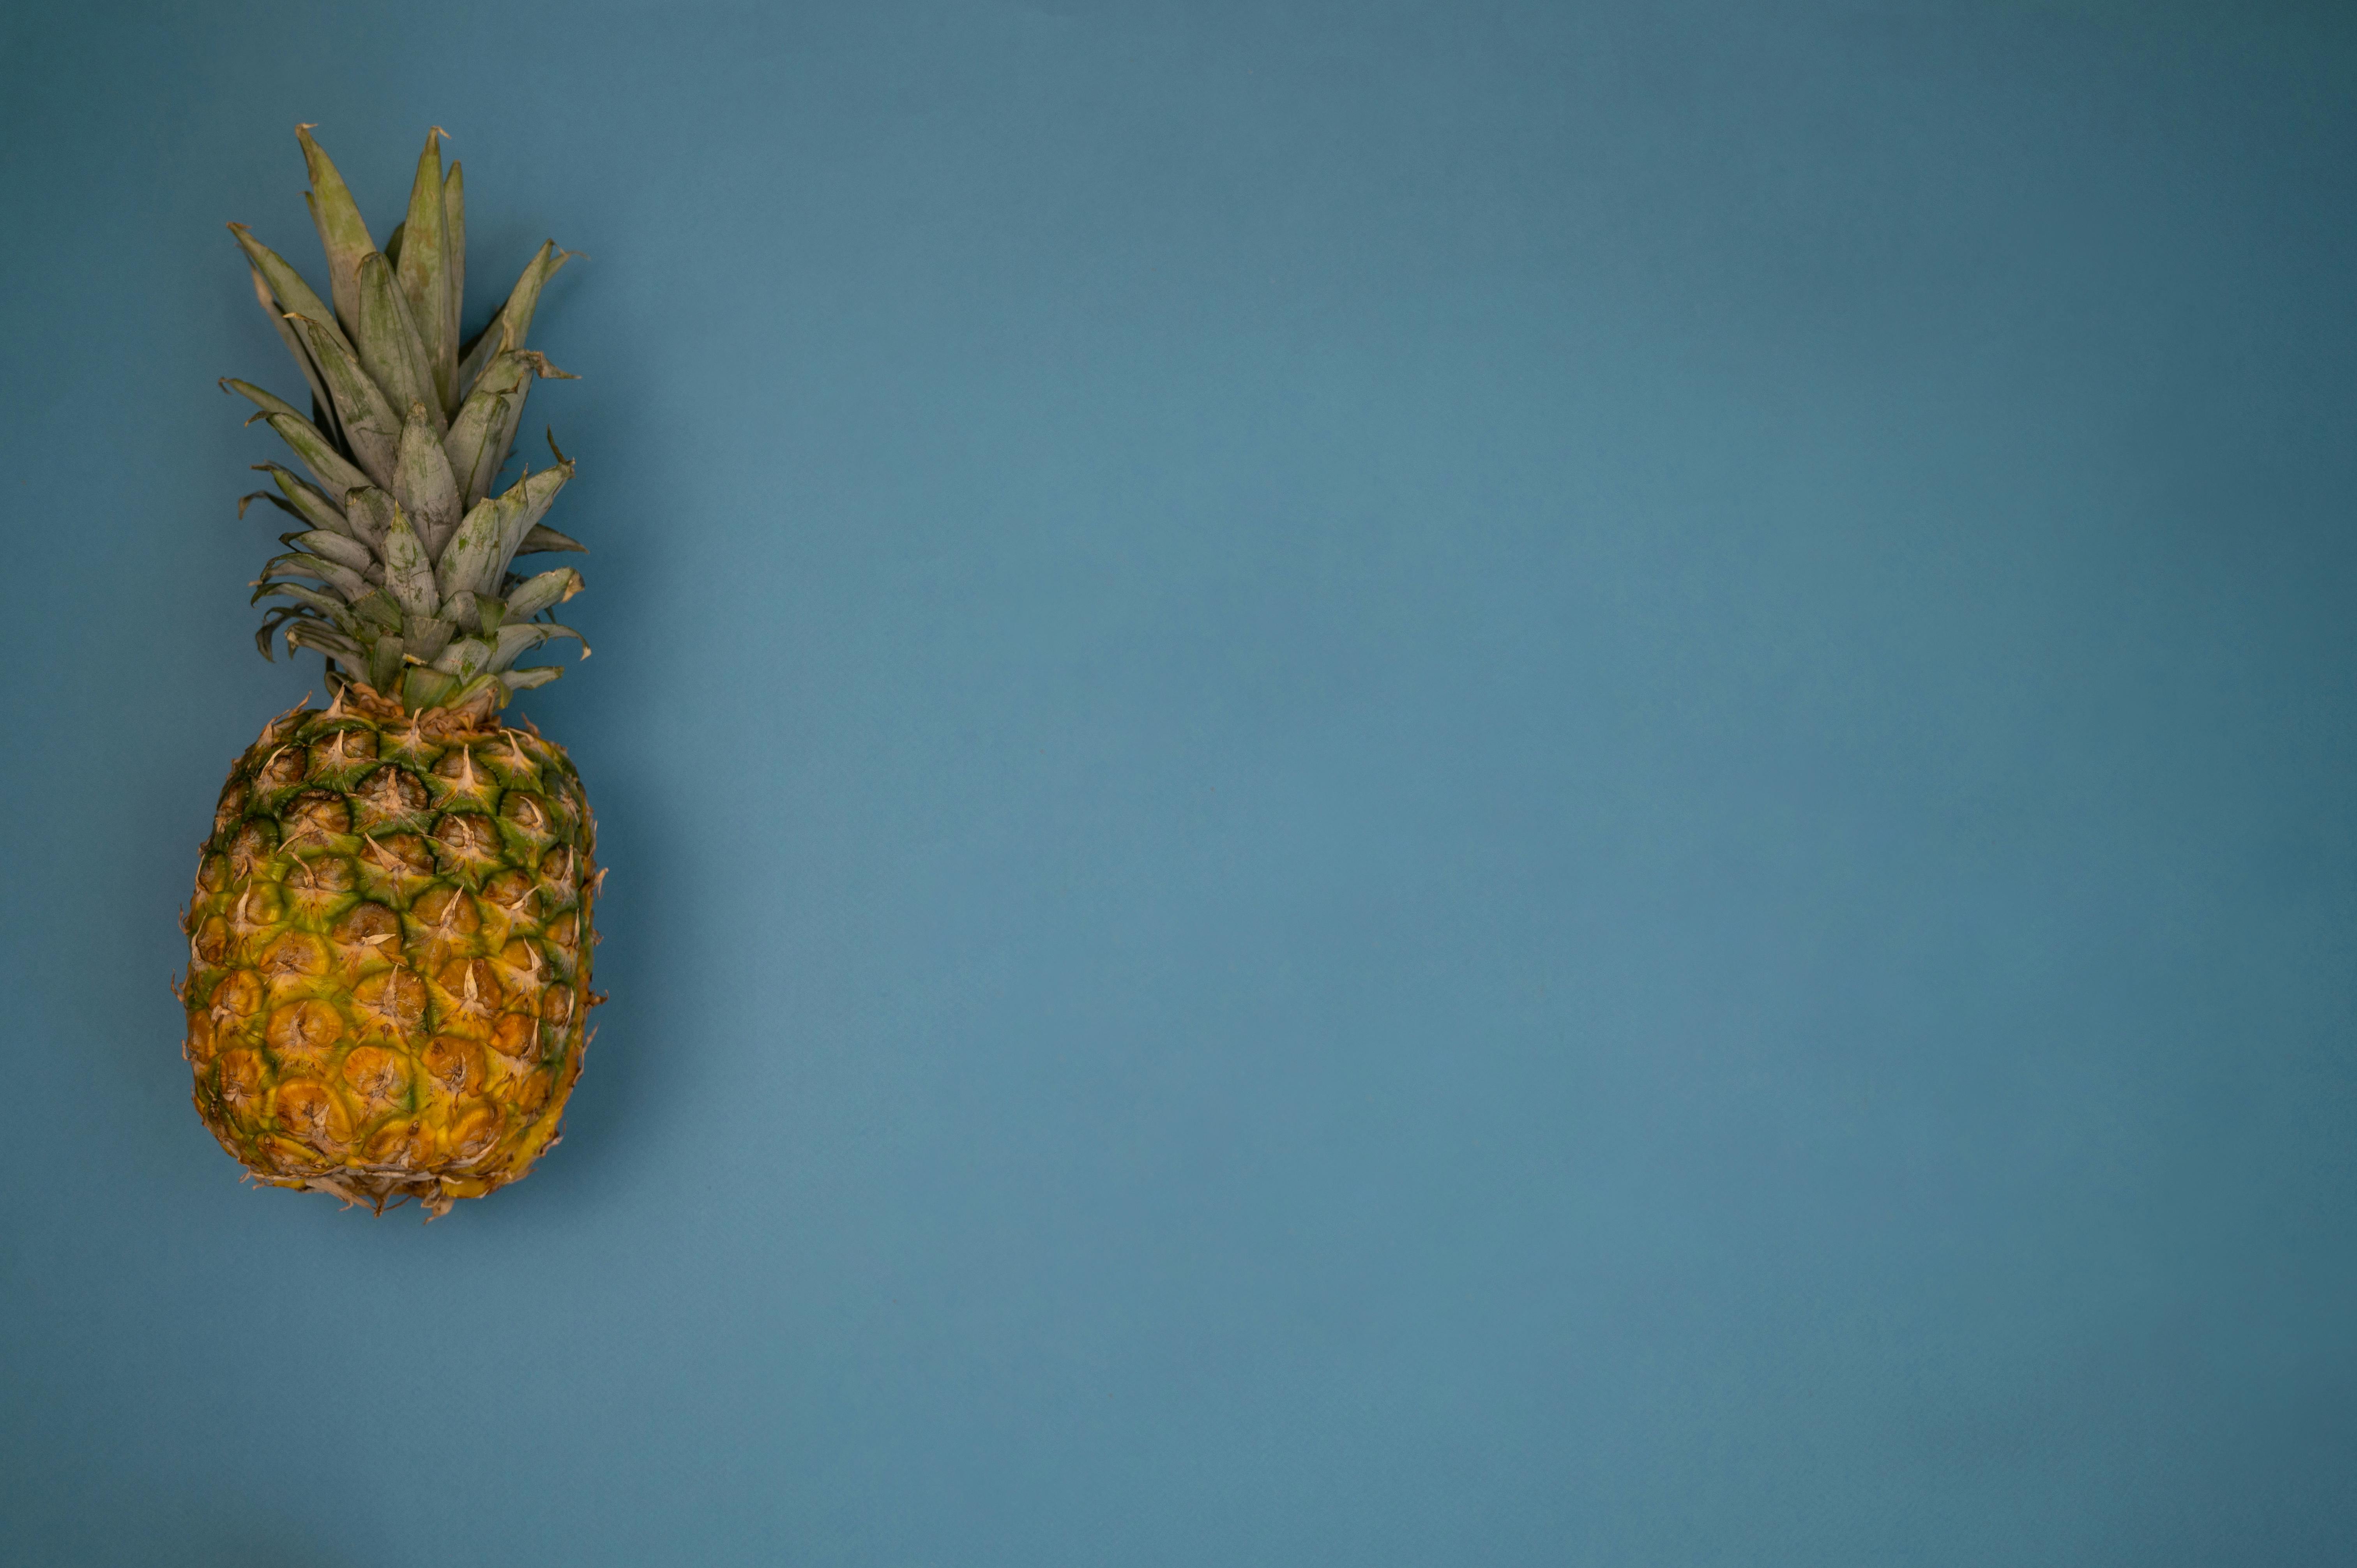 Blue Pineapple on Blue Background. Blue Tinted Window Stock Image - Image  of fresh, concept: 168532053